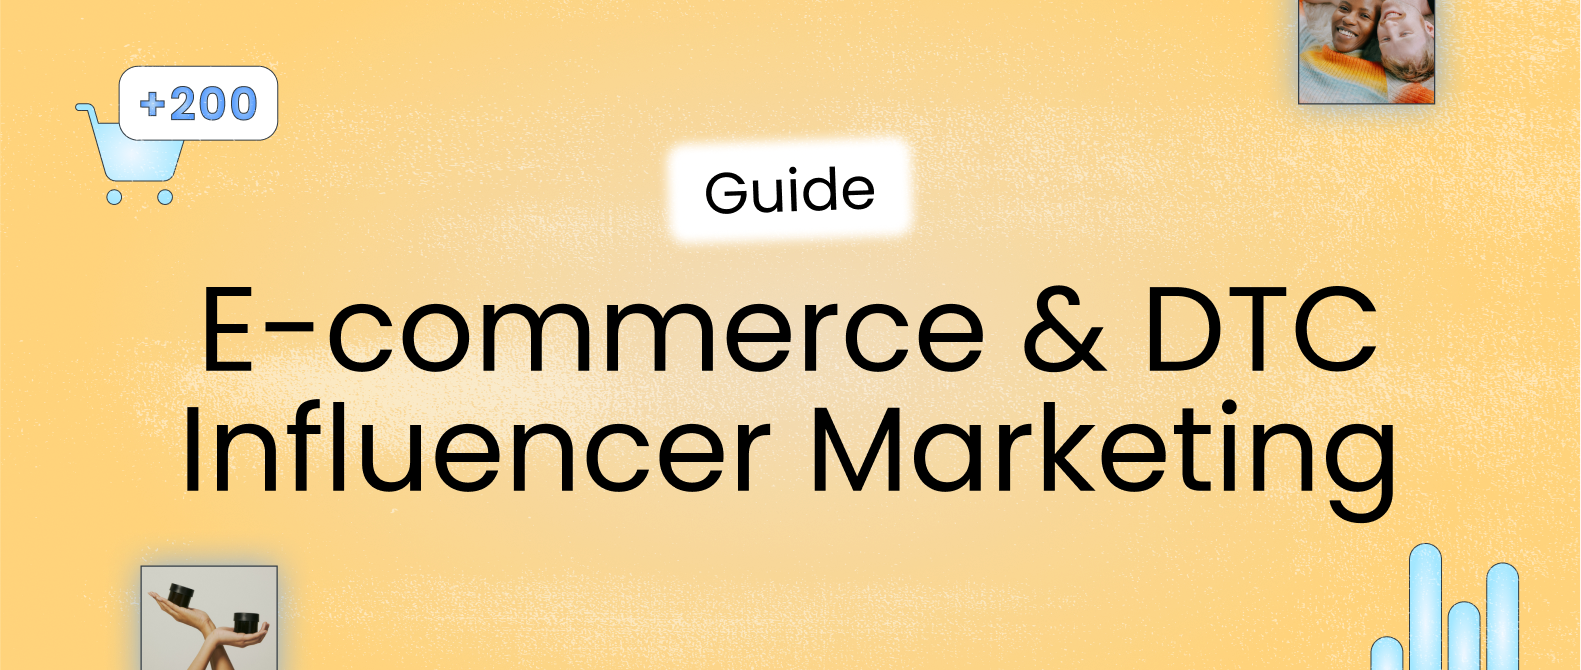 Free influencer marketing guide for E-commerce and direct-to-consumer brands.